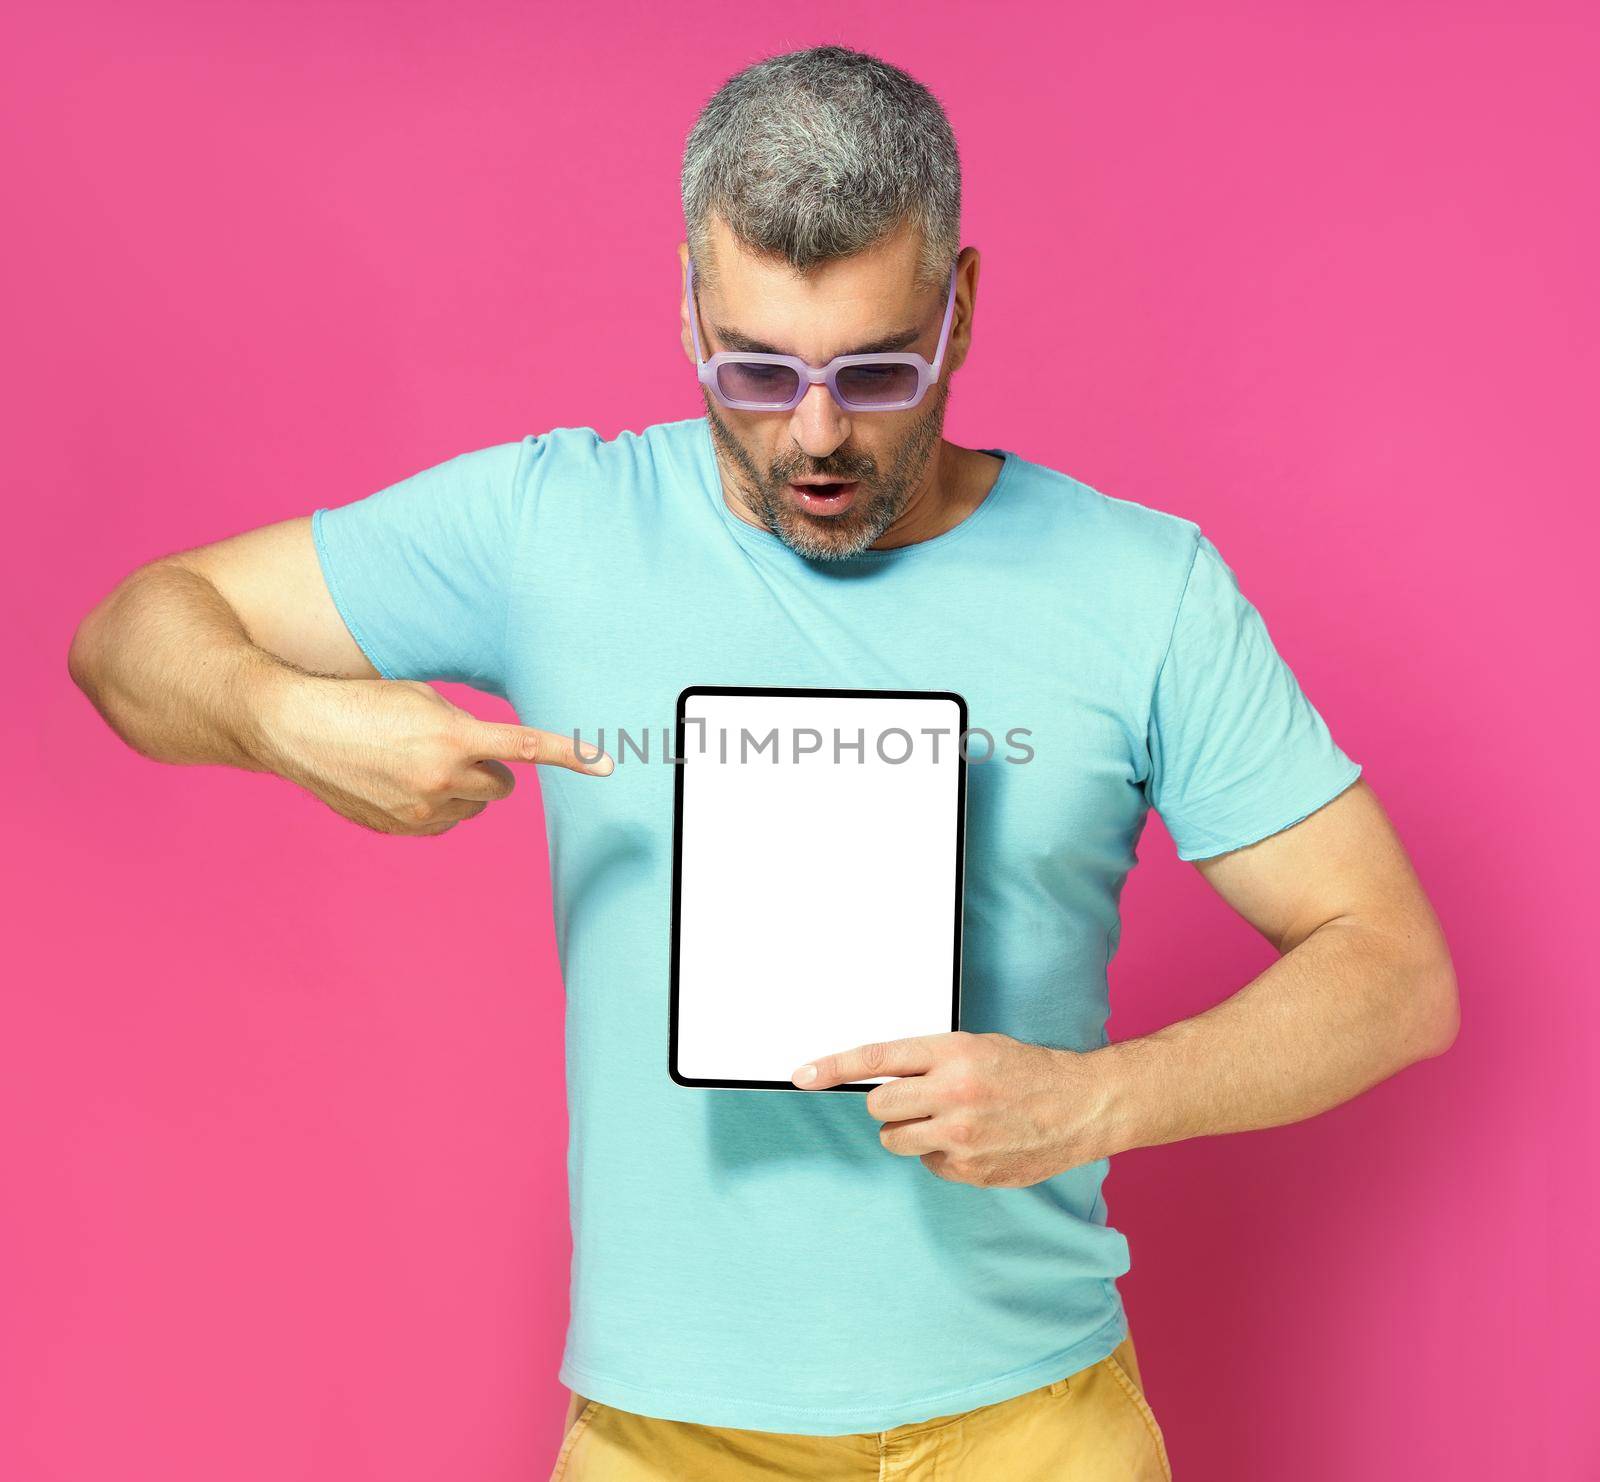 Pointing at digital tablet handsome man looking at white screen lowered his head wearing casual blue shirt and sunglasses isolated on pink background. Mobile app advertisement by LipikStockMedia